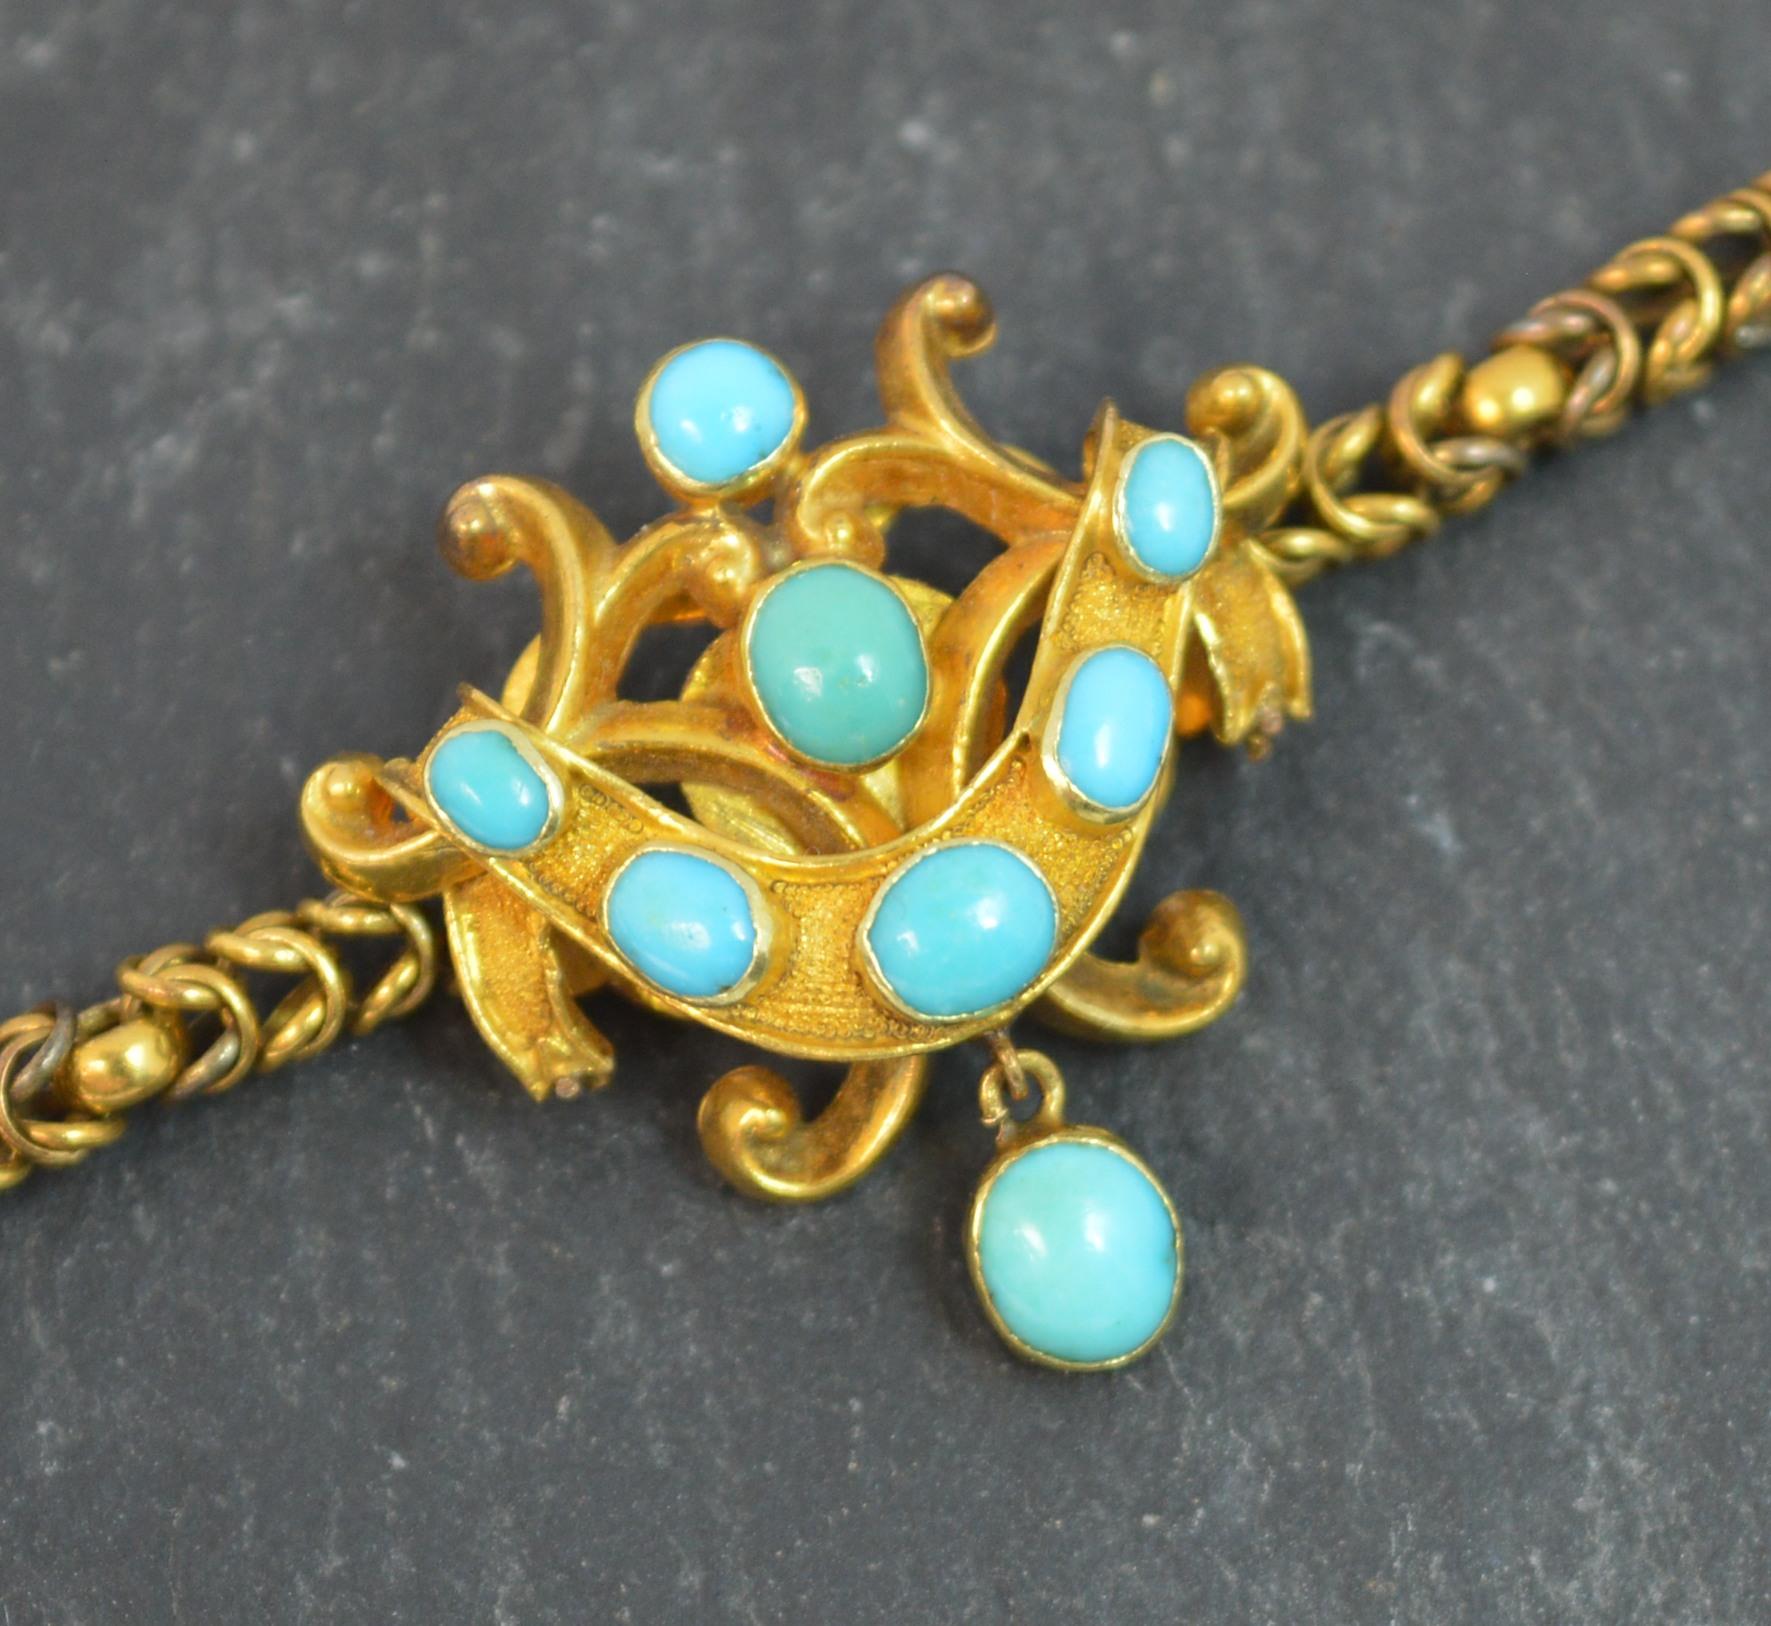 Women's Mid-Victorian 15 Carat Gold and Turquoise Fancy Snake Bracelet